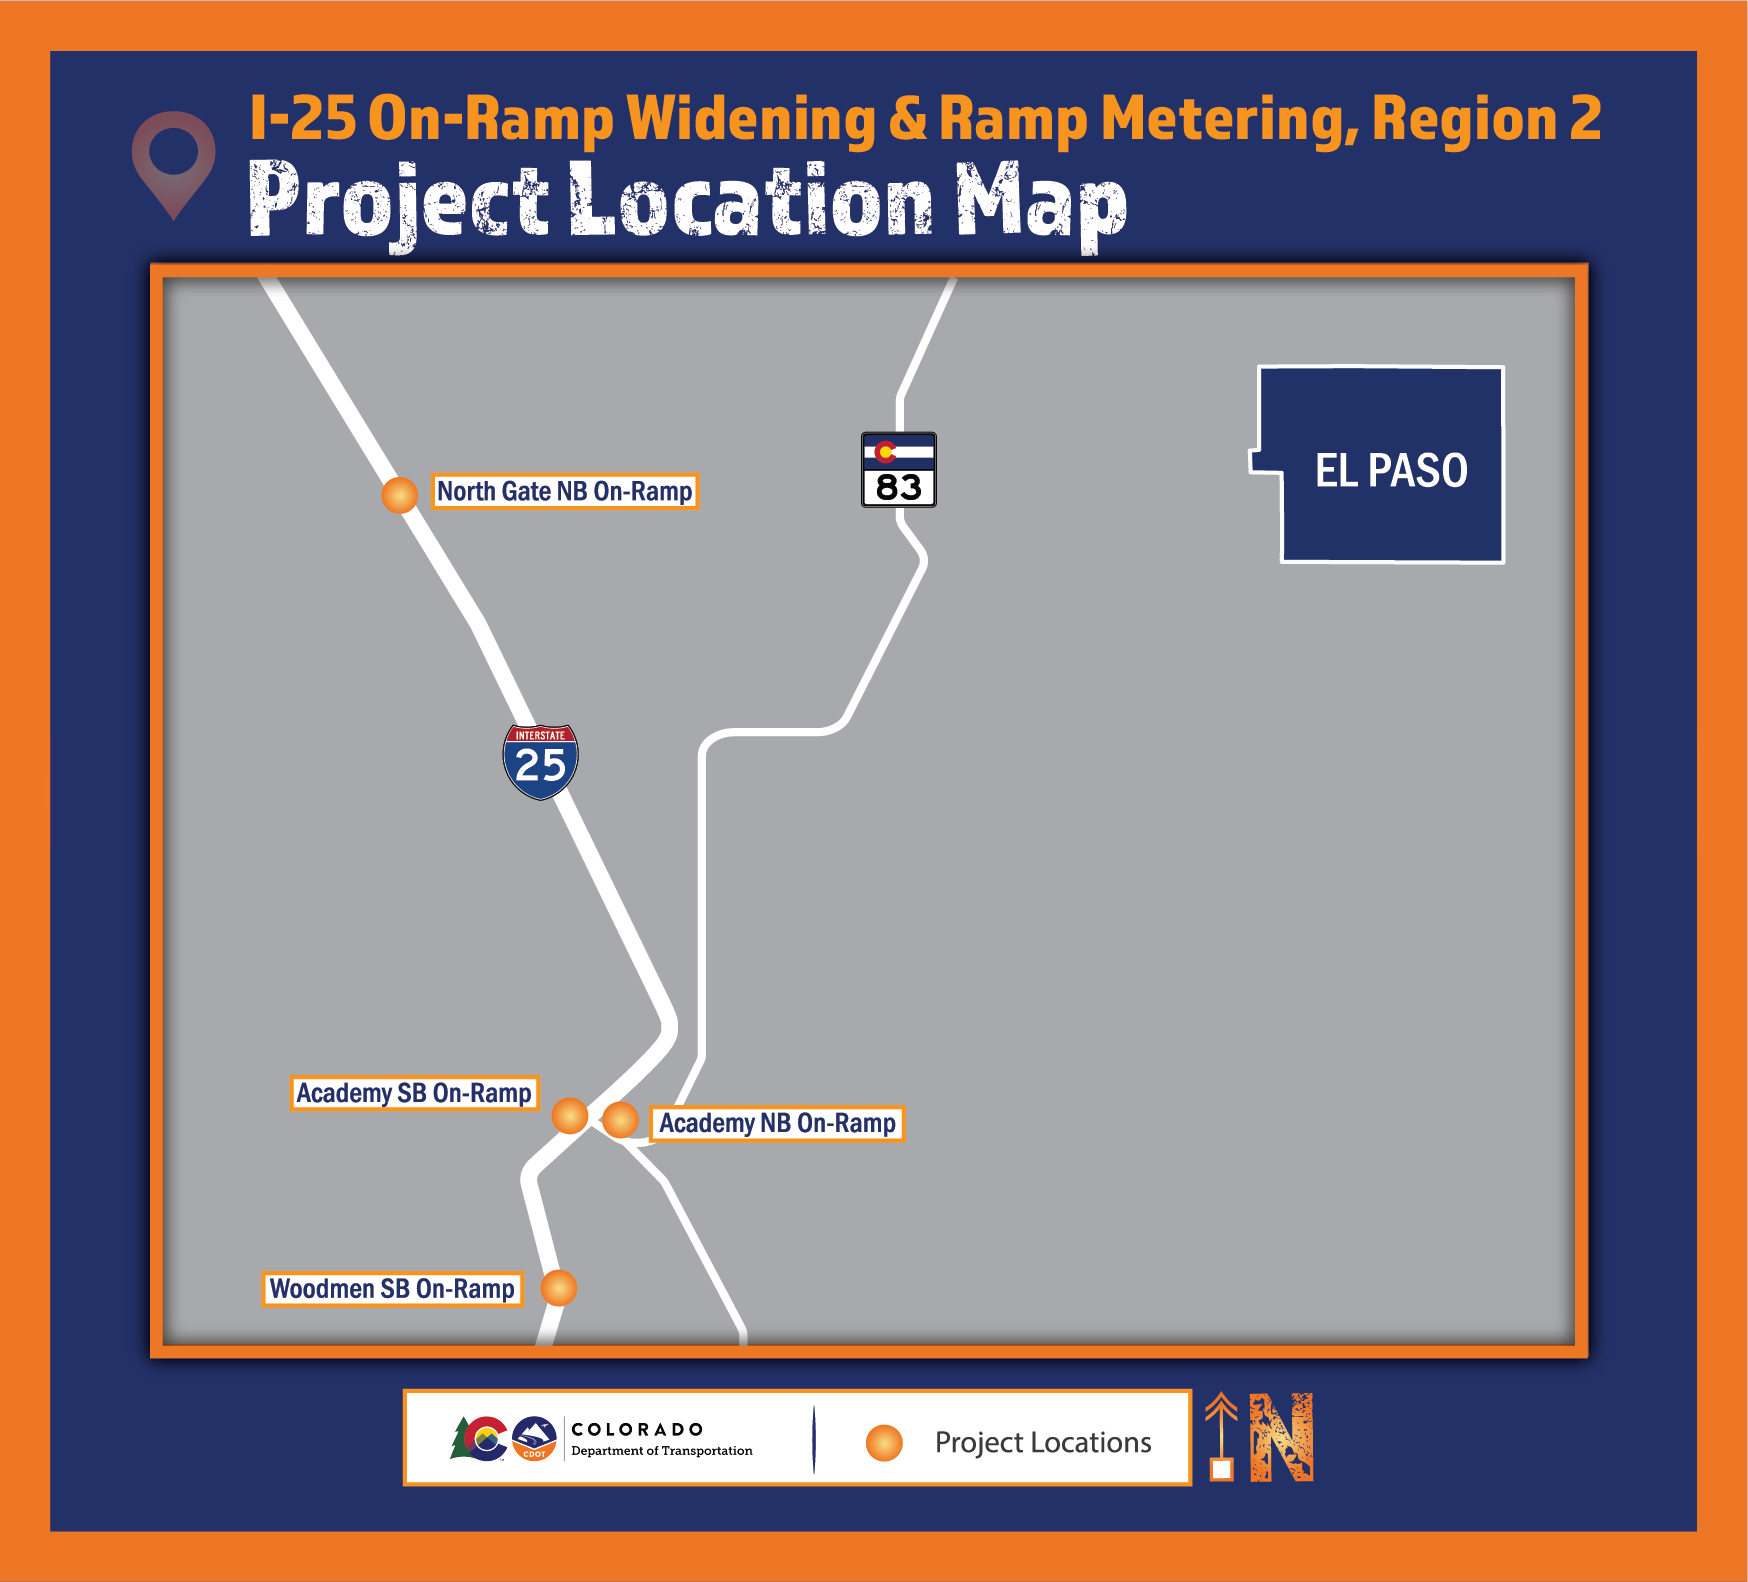 Remp metering project map on I-25 in Co. springs detail image